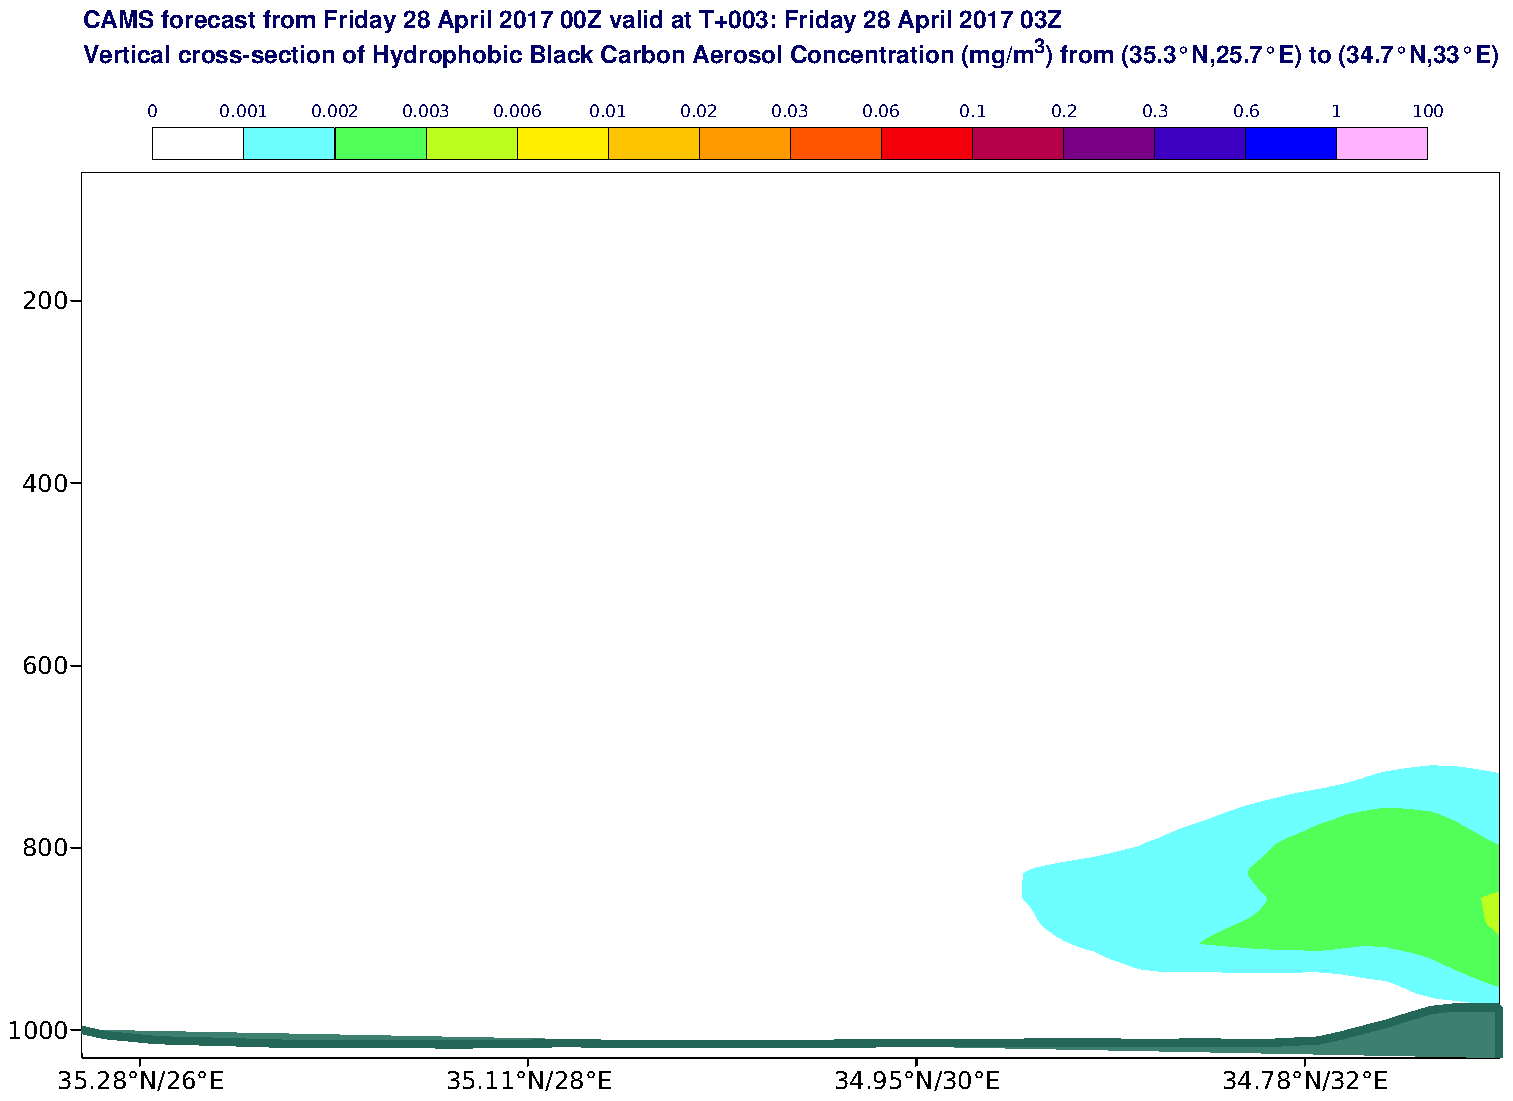 Vertical cross-section of Hydrophobic Black Carbon Aerosol Concentration (mg/m3) valid at T3 - 2017-04-28 03:00